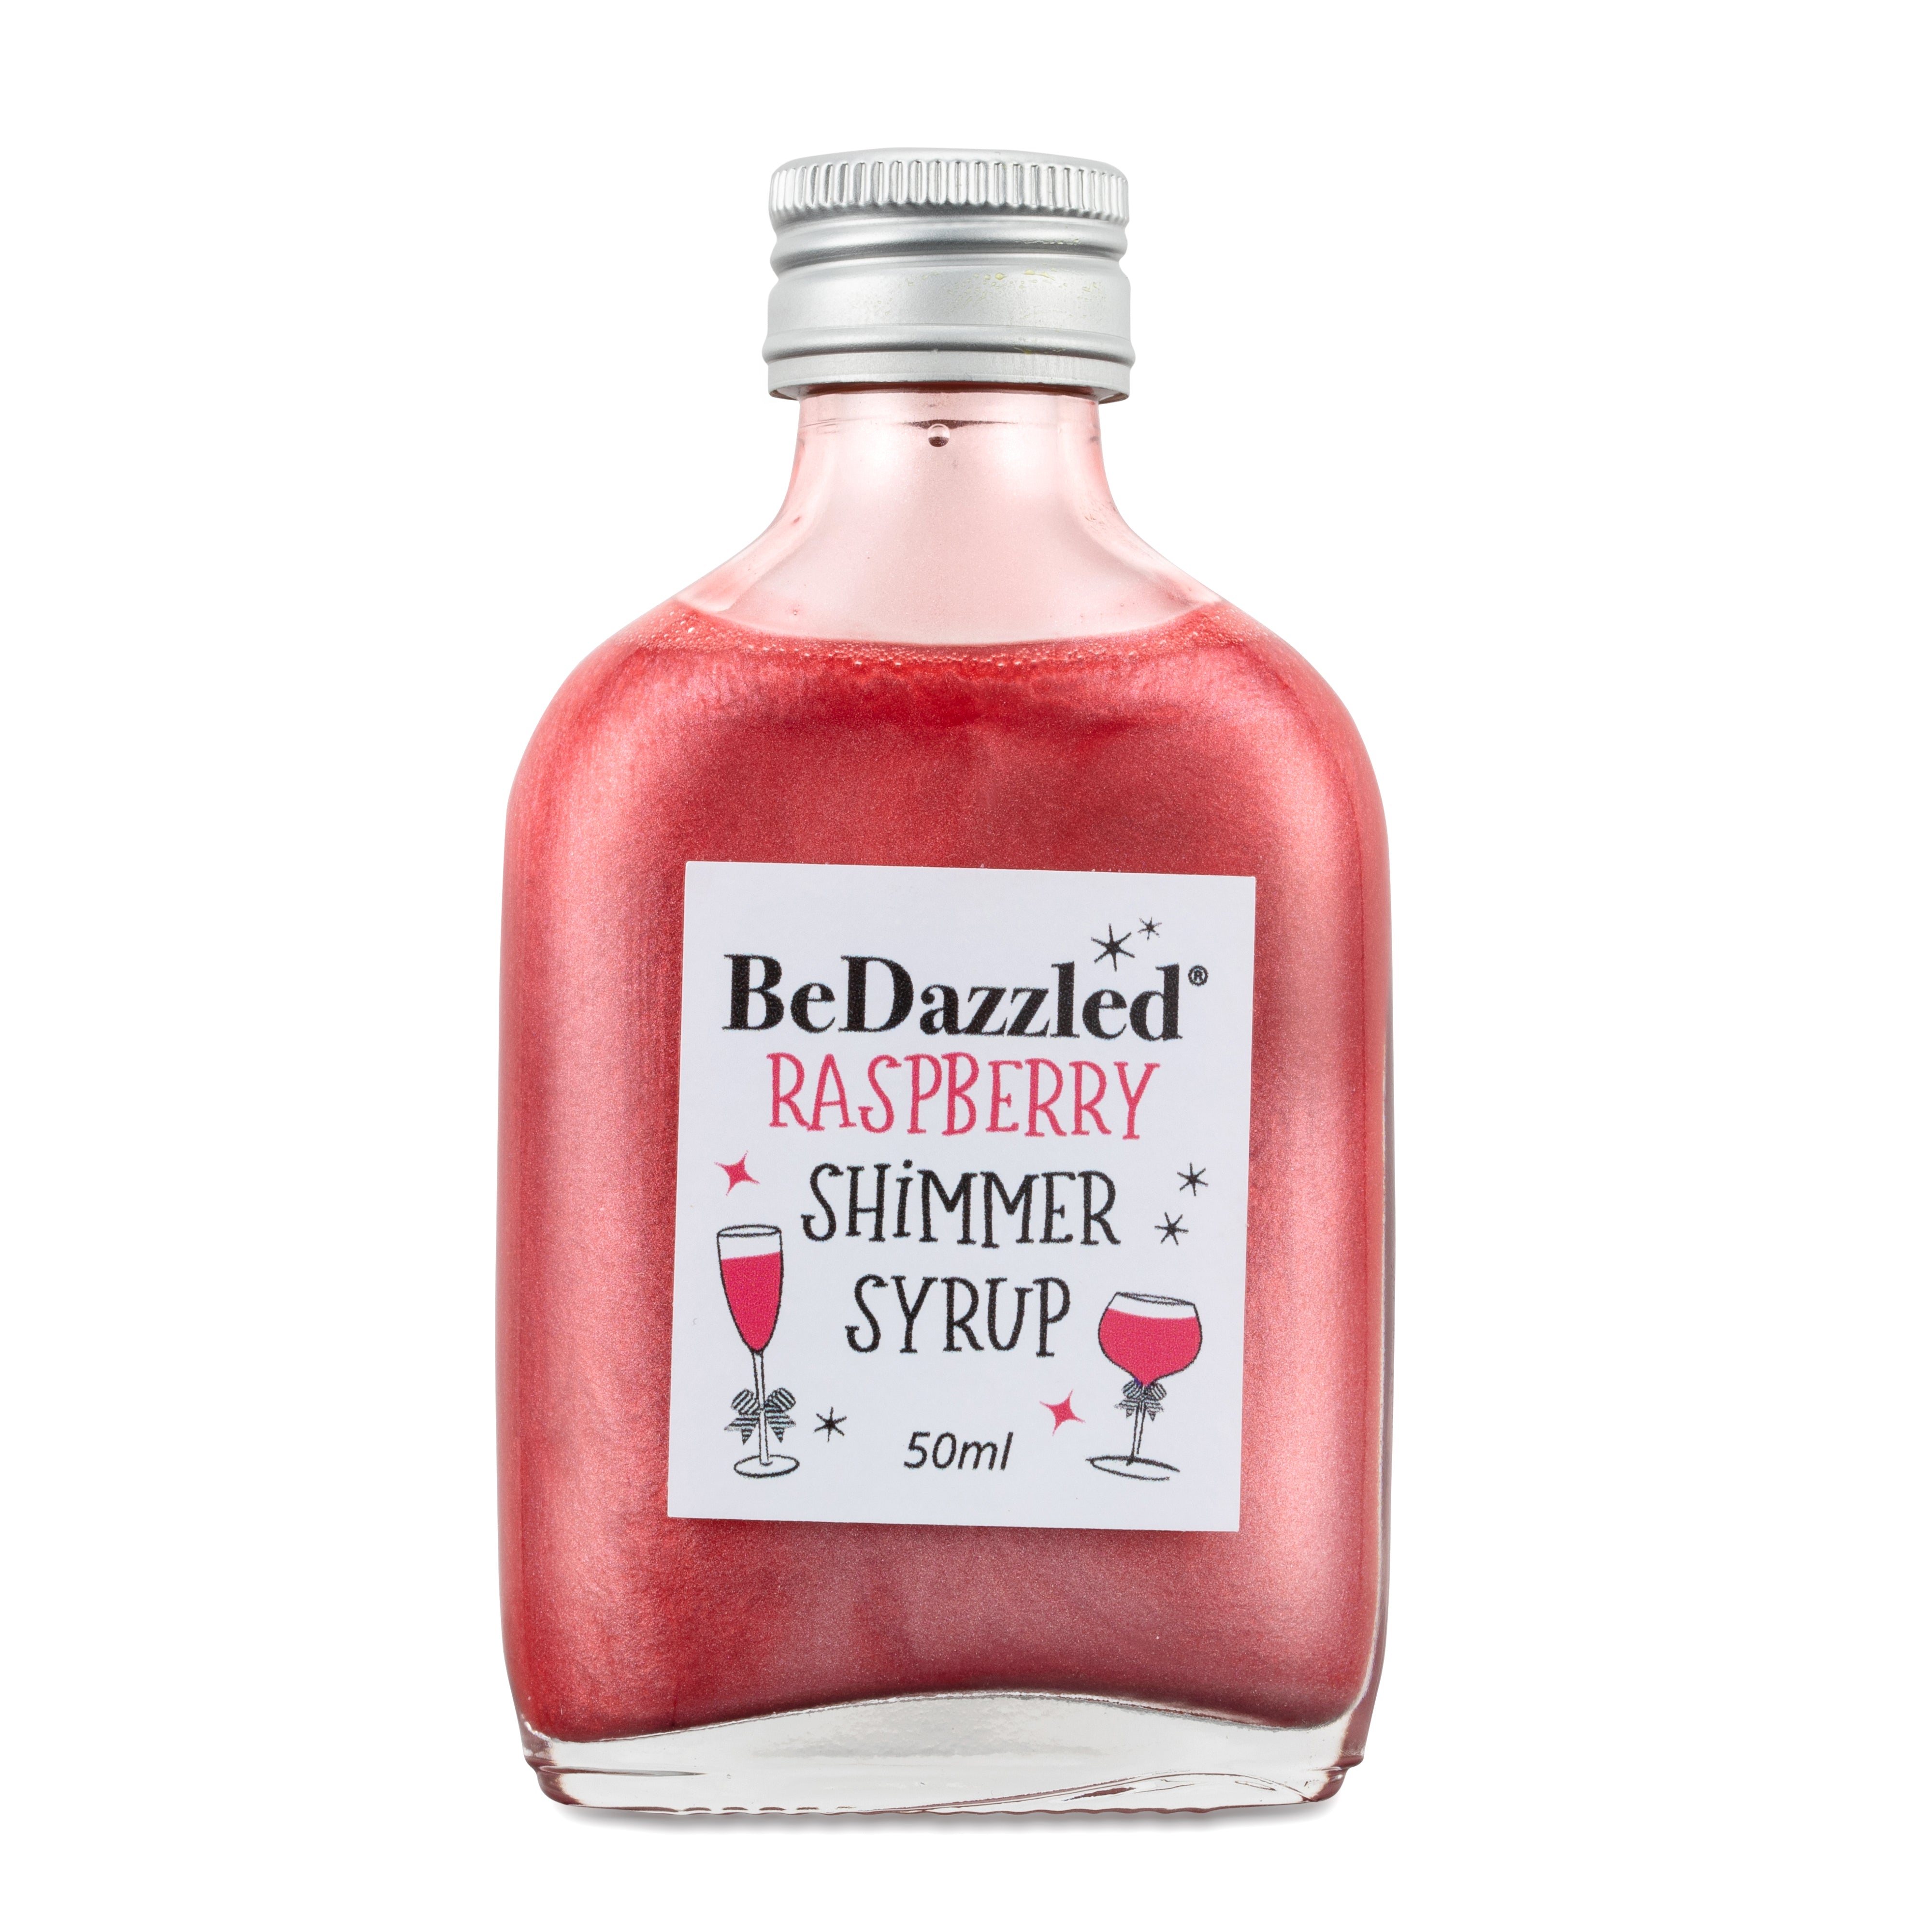 Raspberry Shimmer Syrup 50ml